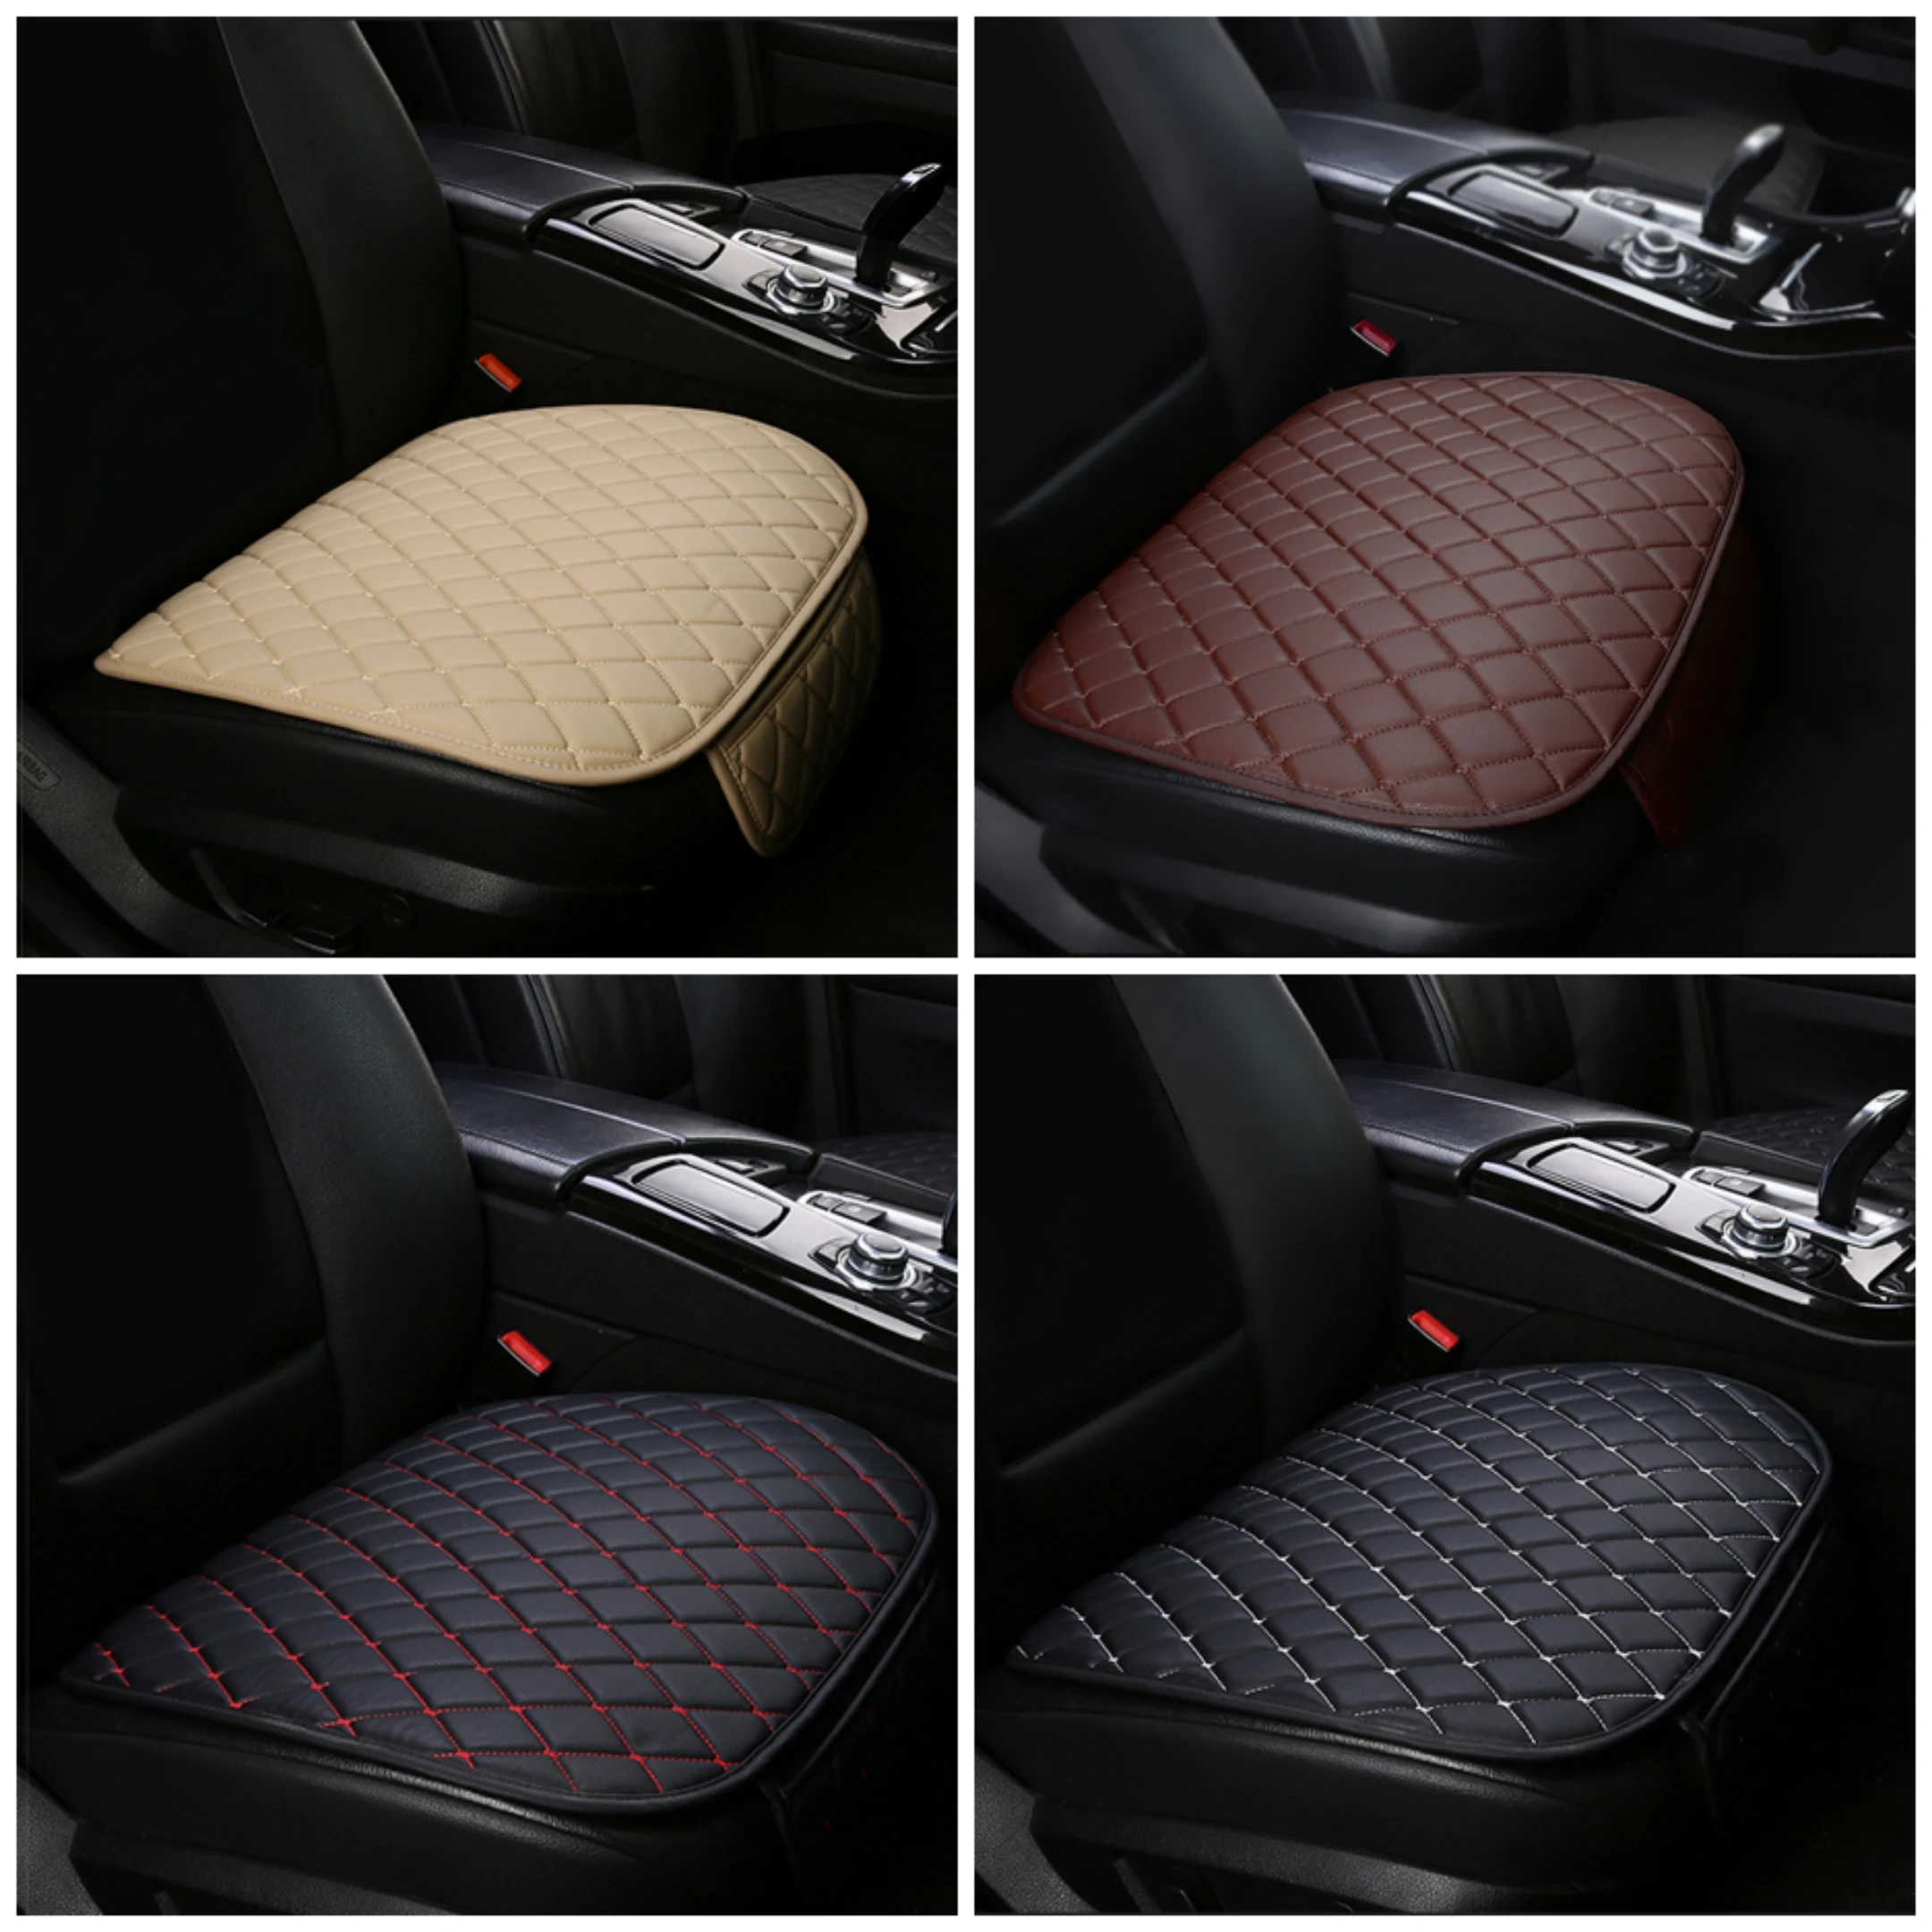 

1PC Front Leather Car Seat Cover For Peugeot 508 207 307 407 3008 206 2008 208 sw 308 107 301 408 5008 4008 Rifter Traveller RCZ